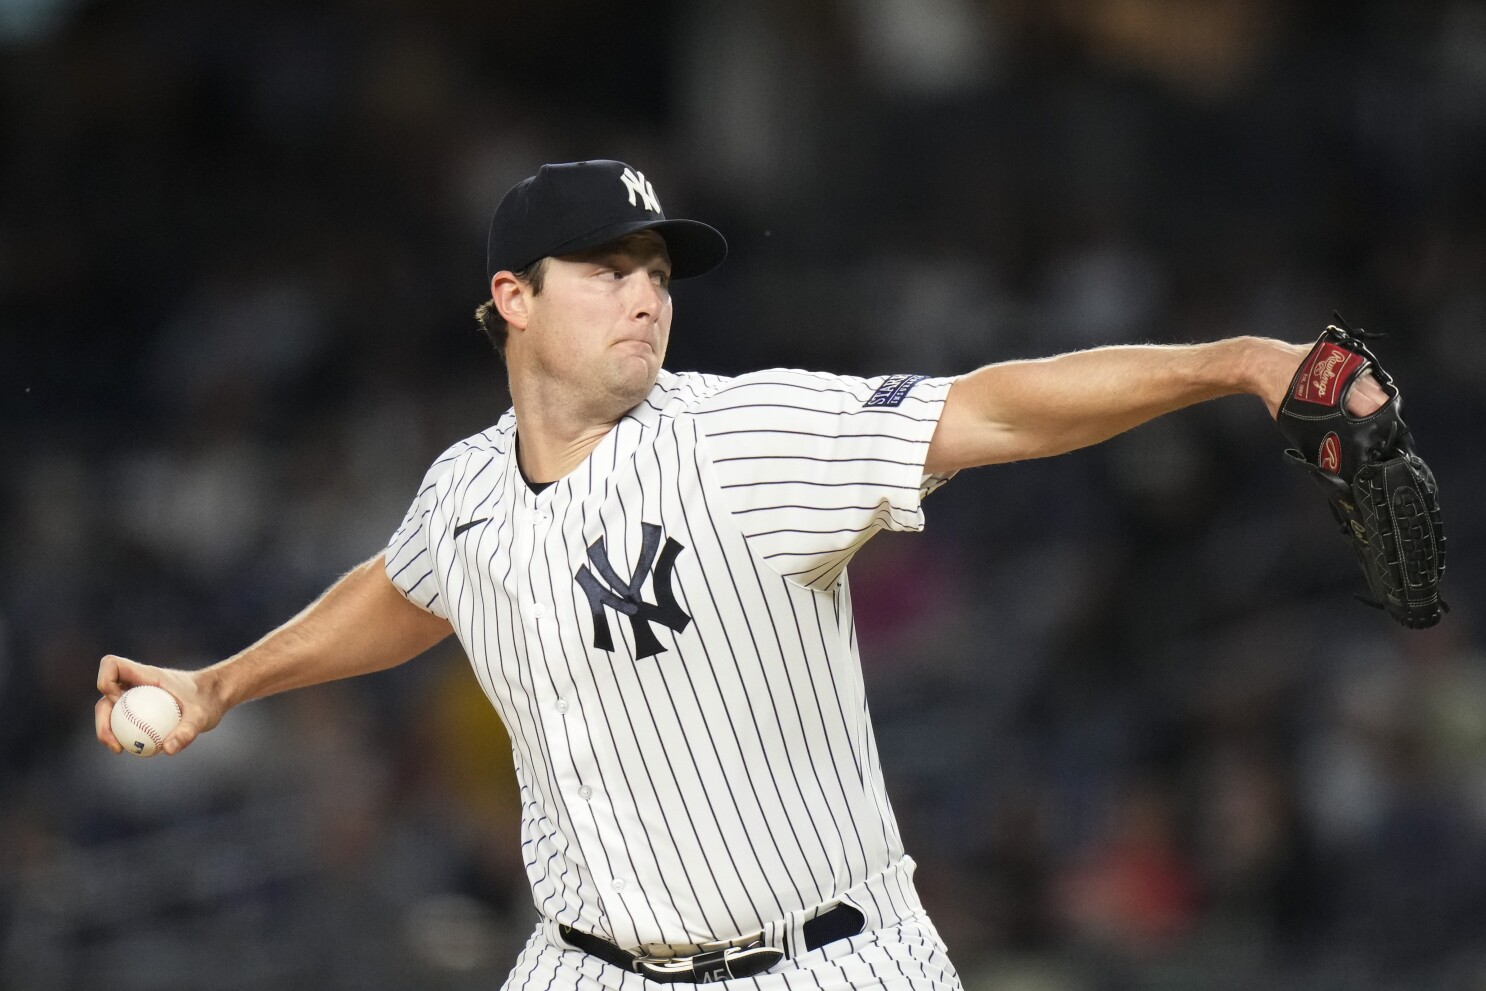 Dominant pitching and extra-inning inning thrillers lead WBC Day 5 -  Pinstripe Alley